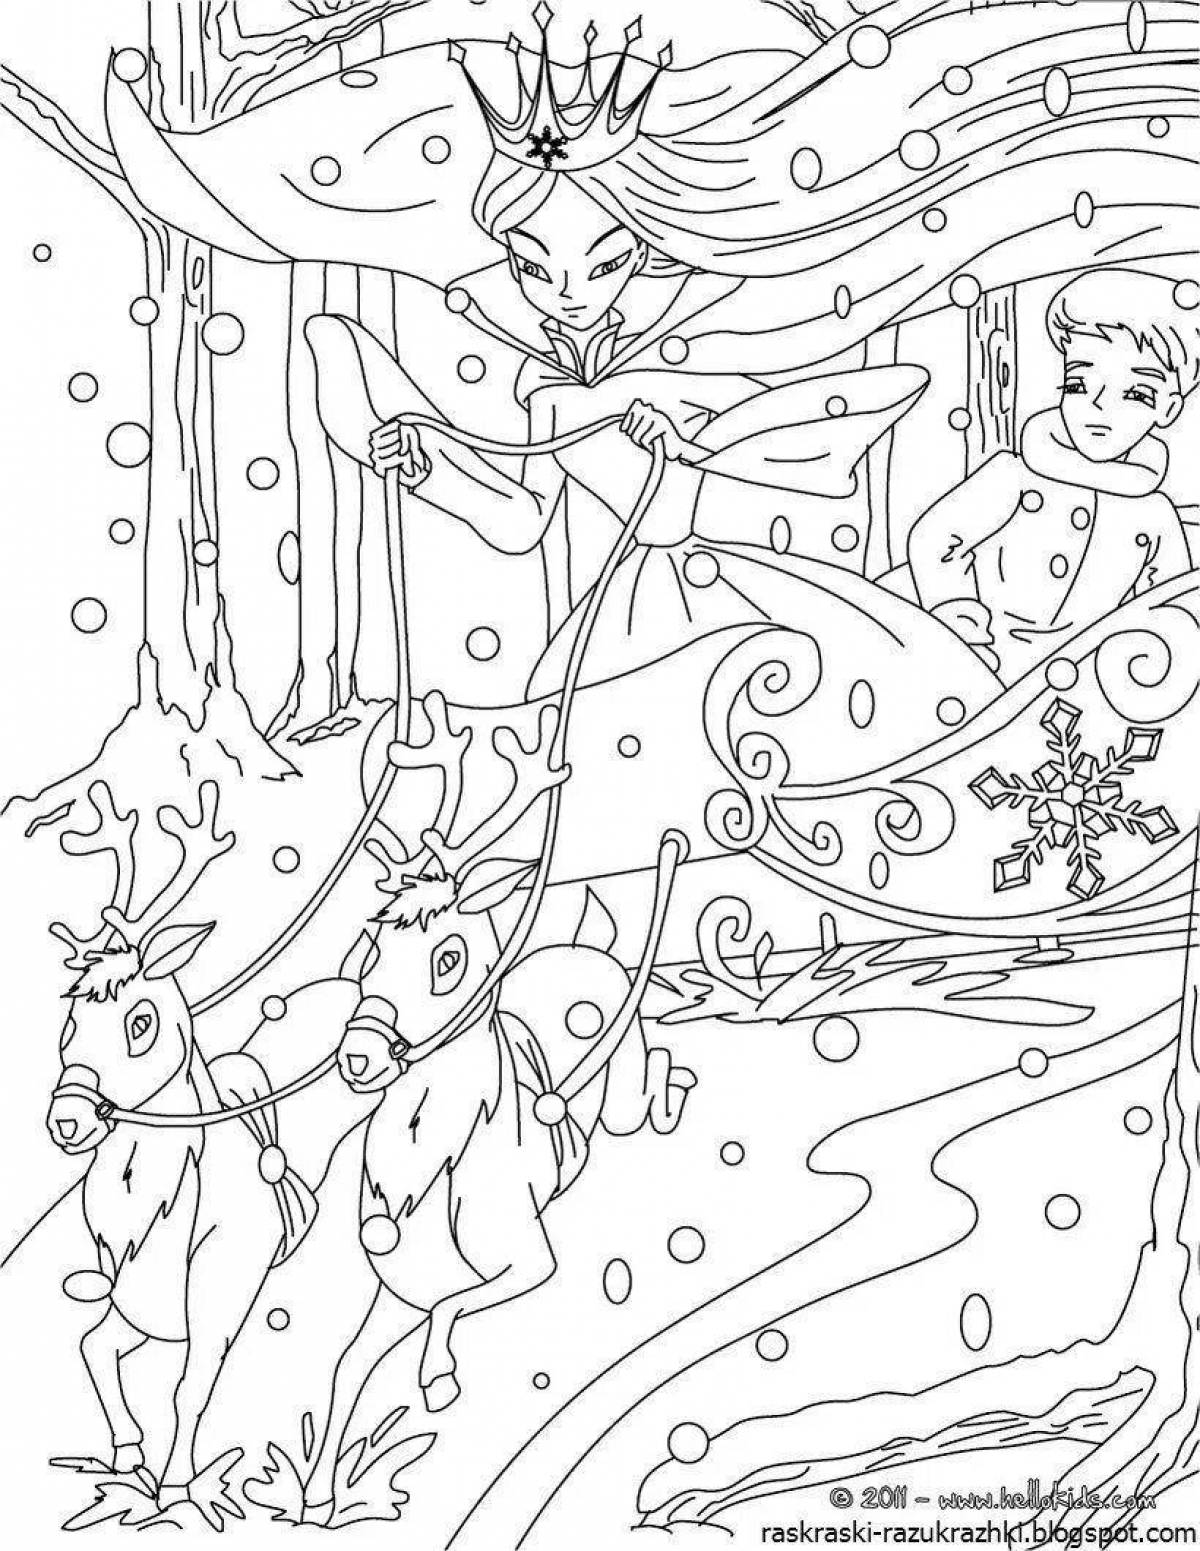 Charming snow queen coloring book